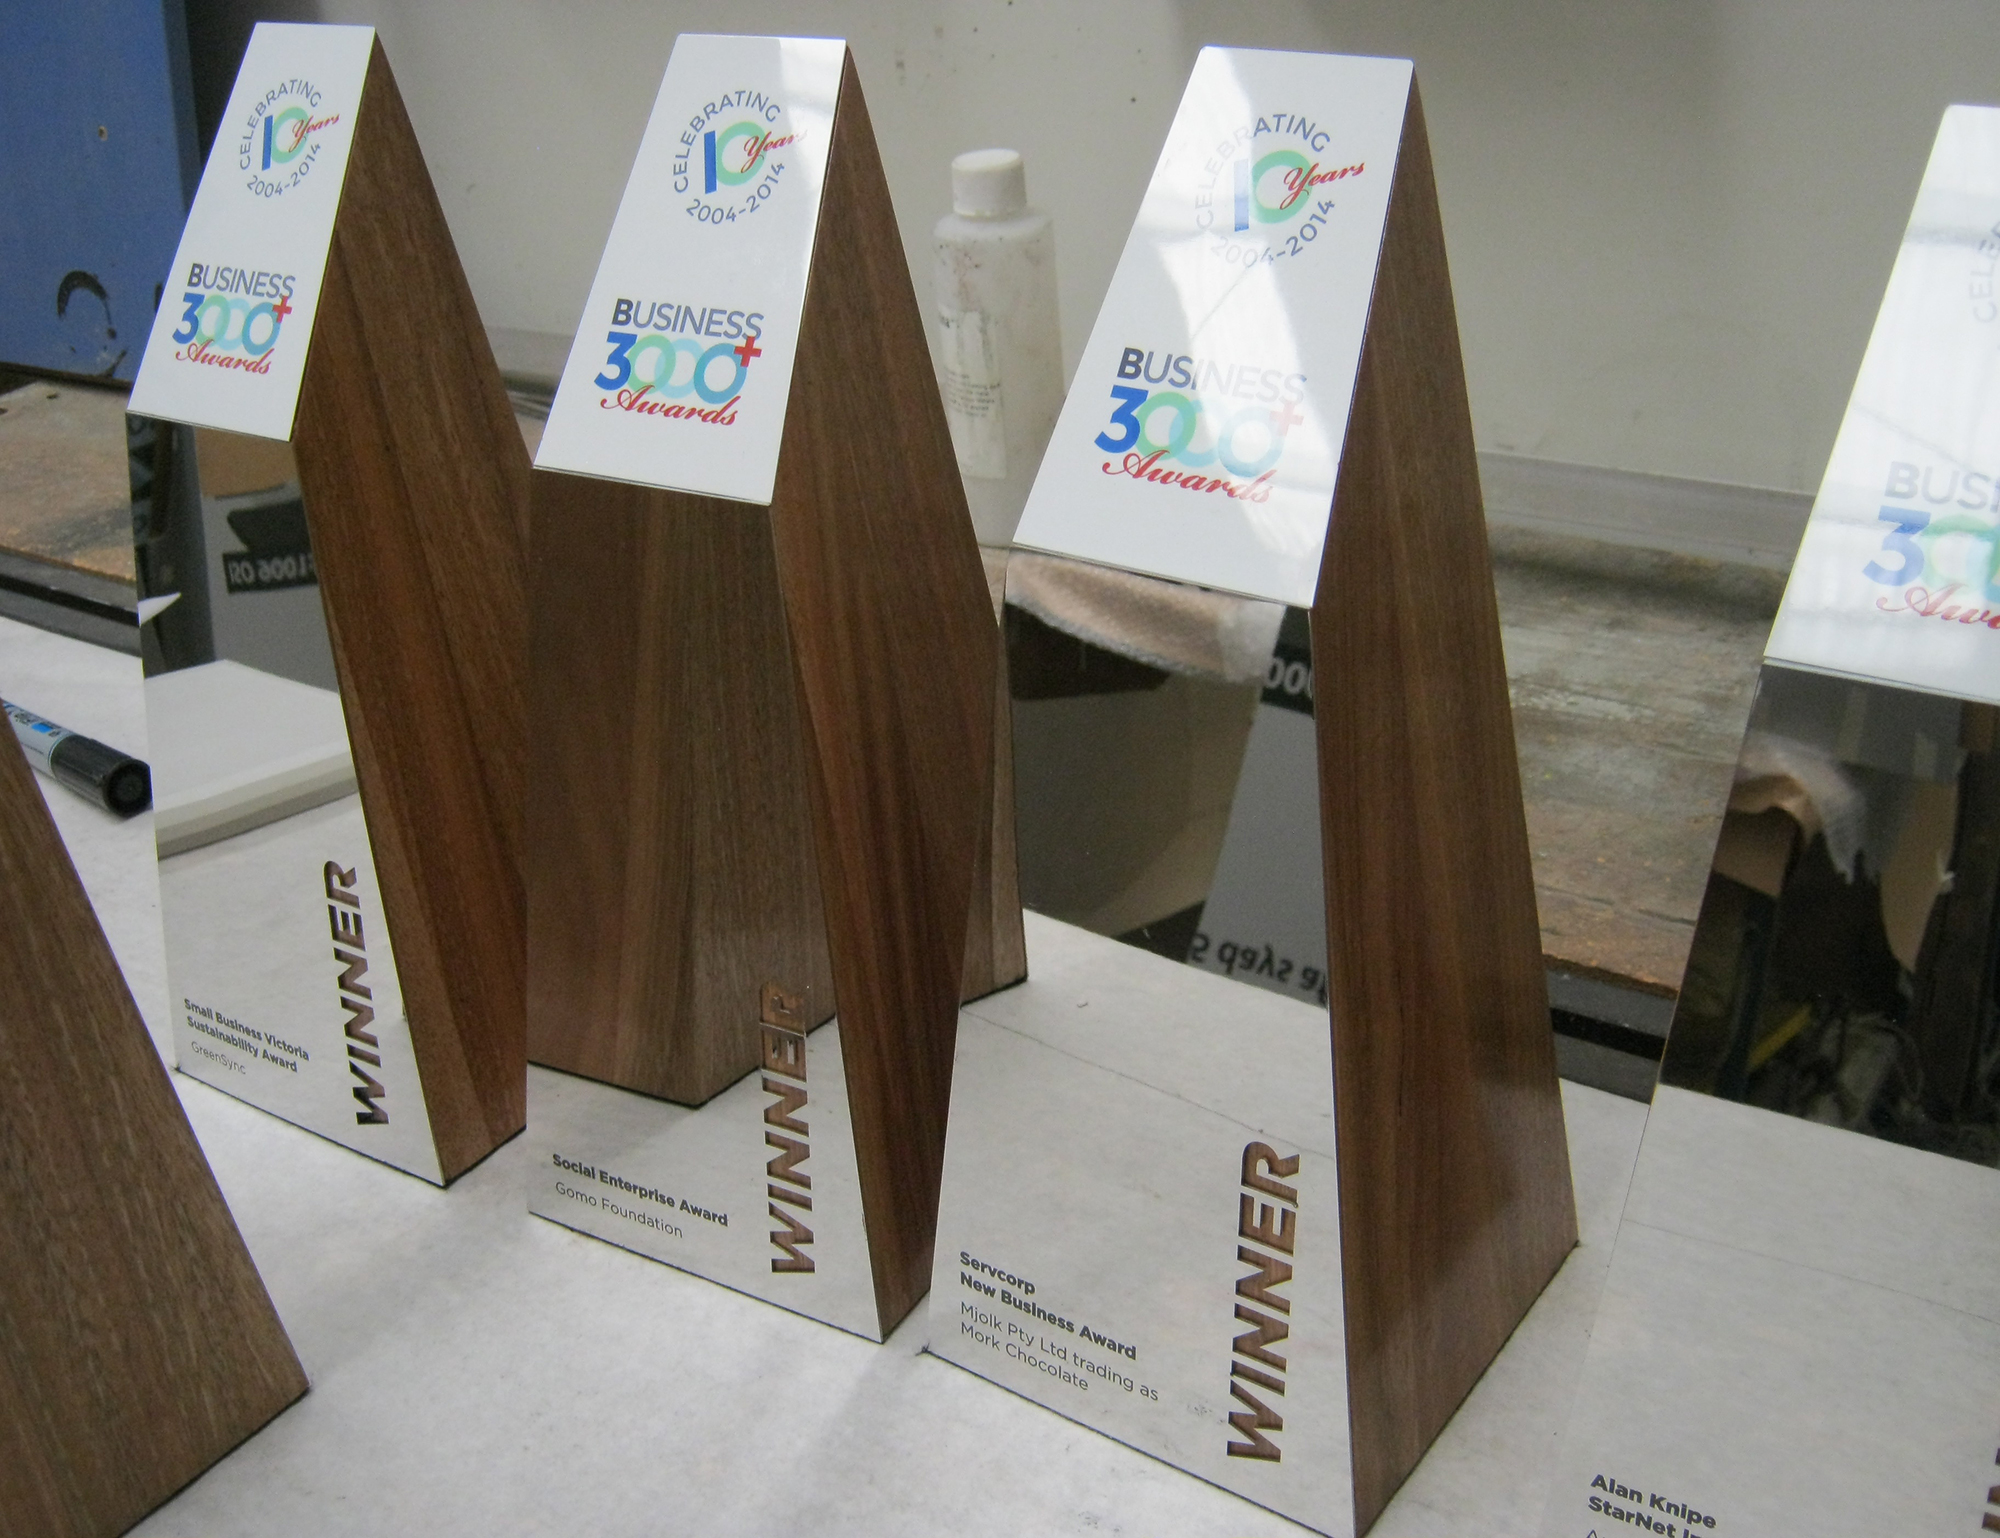 Business-3000-awards-hardwood-mirror-stainless-sublimated-prints